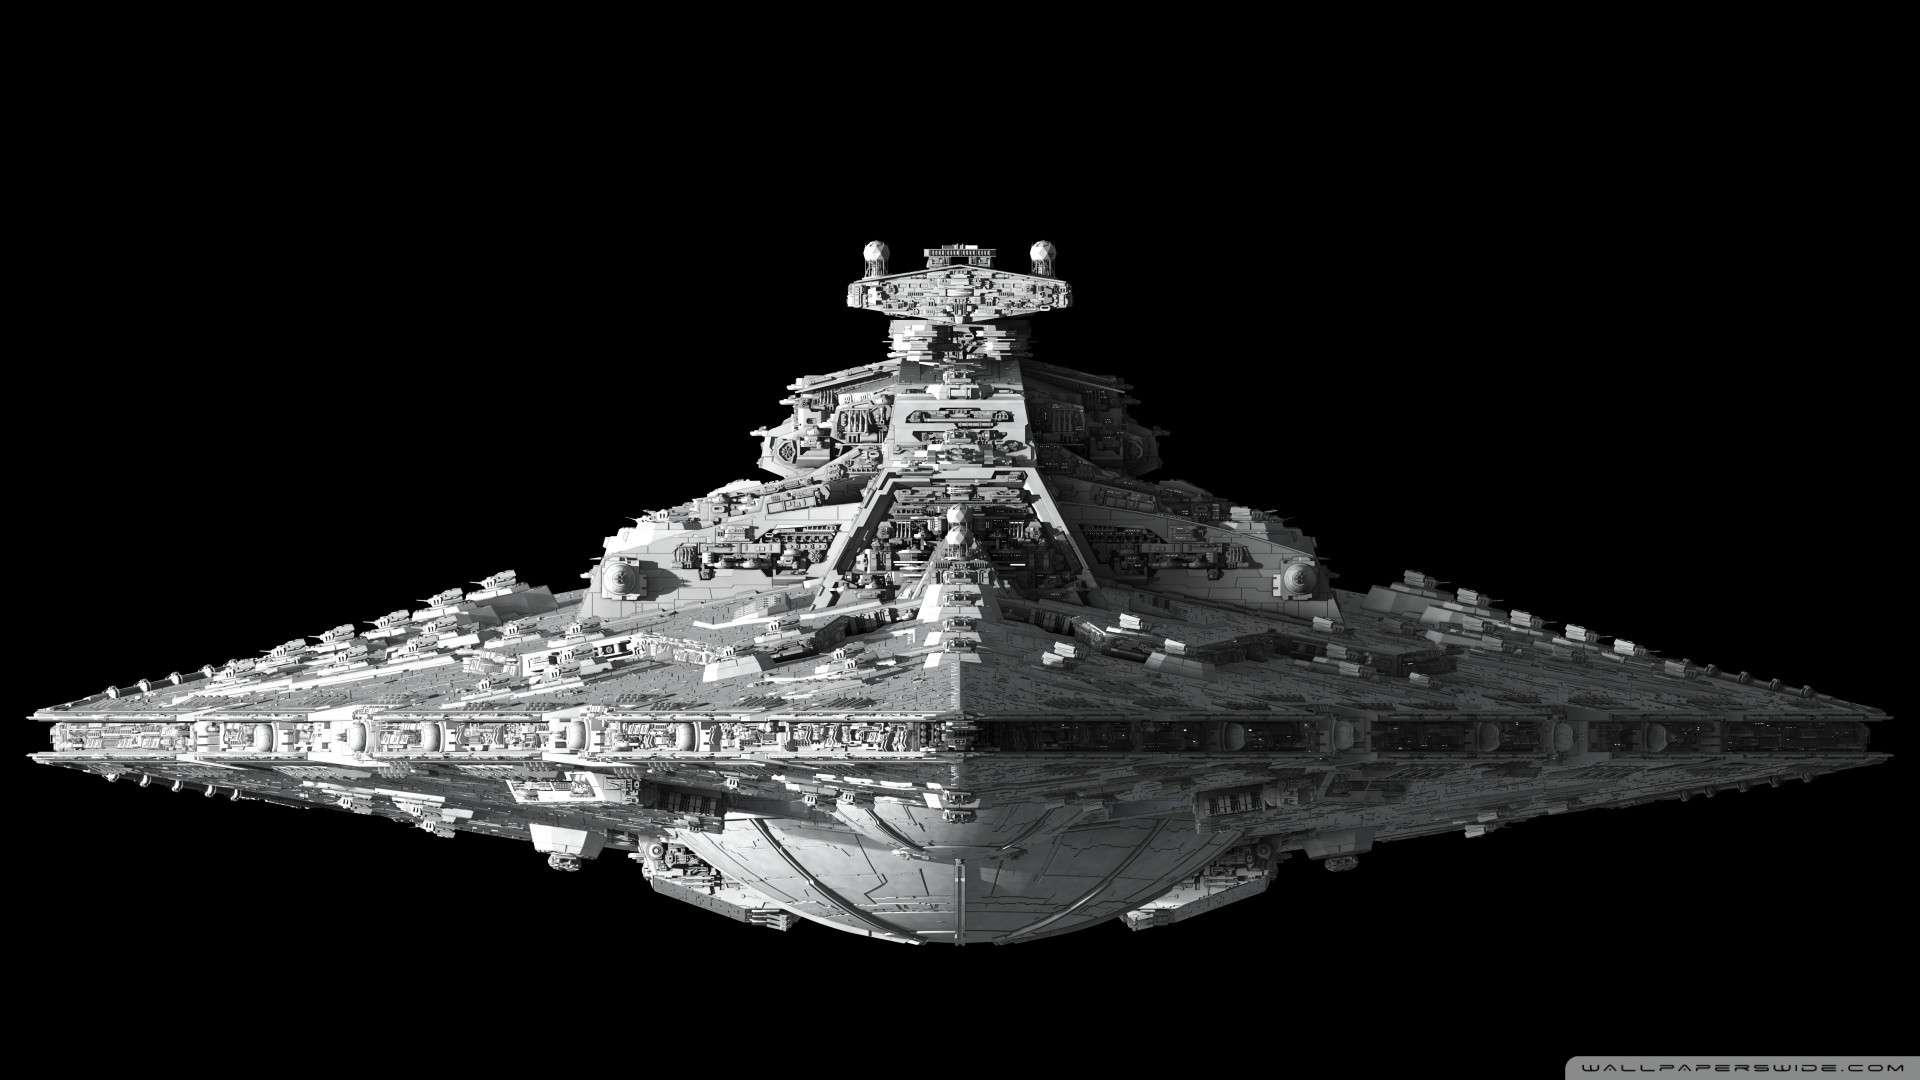 Star Wars Destroyer. How to set wallpaper on your desktop? Click  the download link from above and set the wallpaper on the desktop from your  OS.